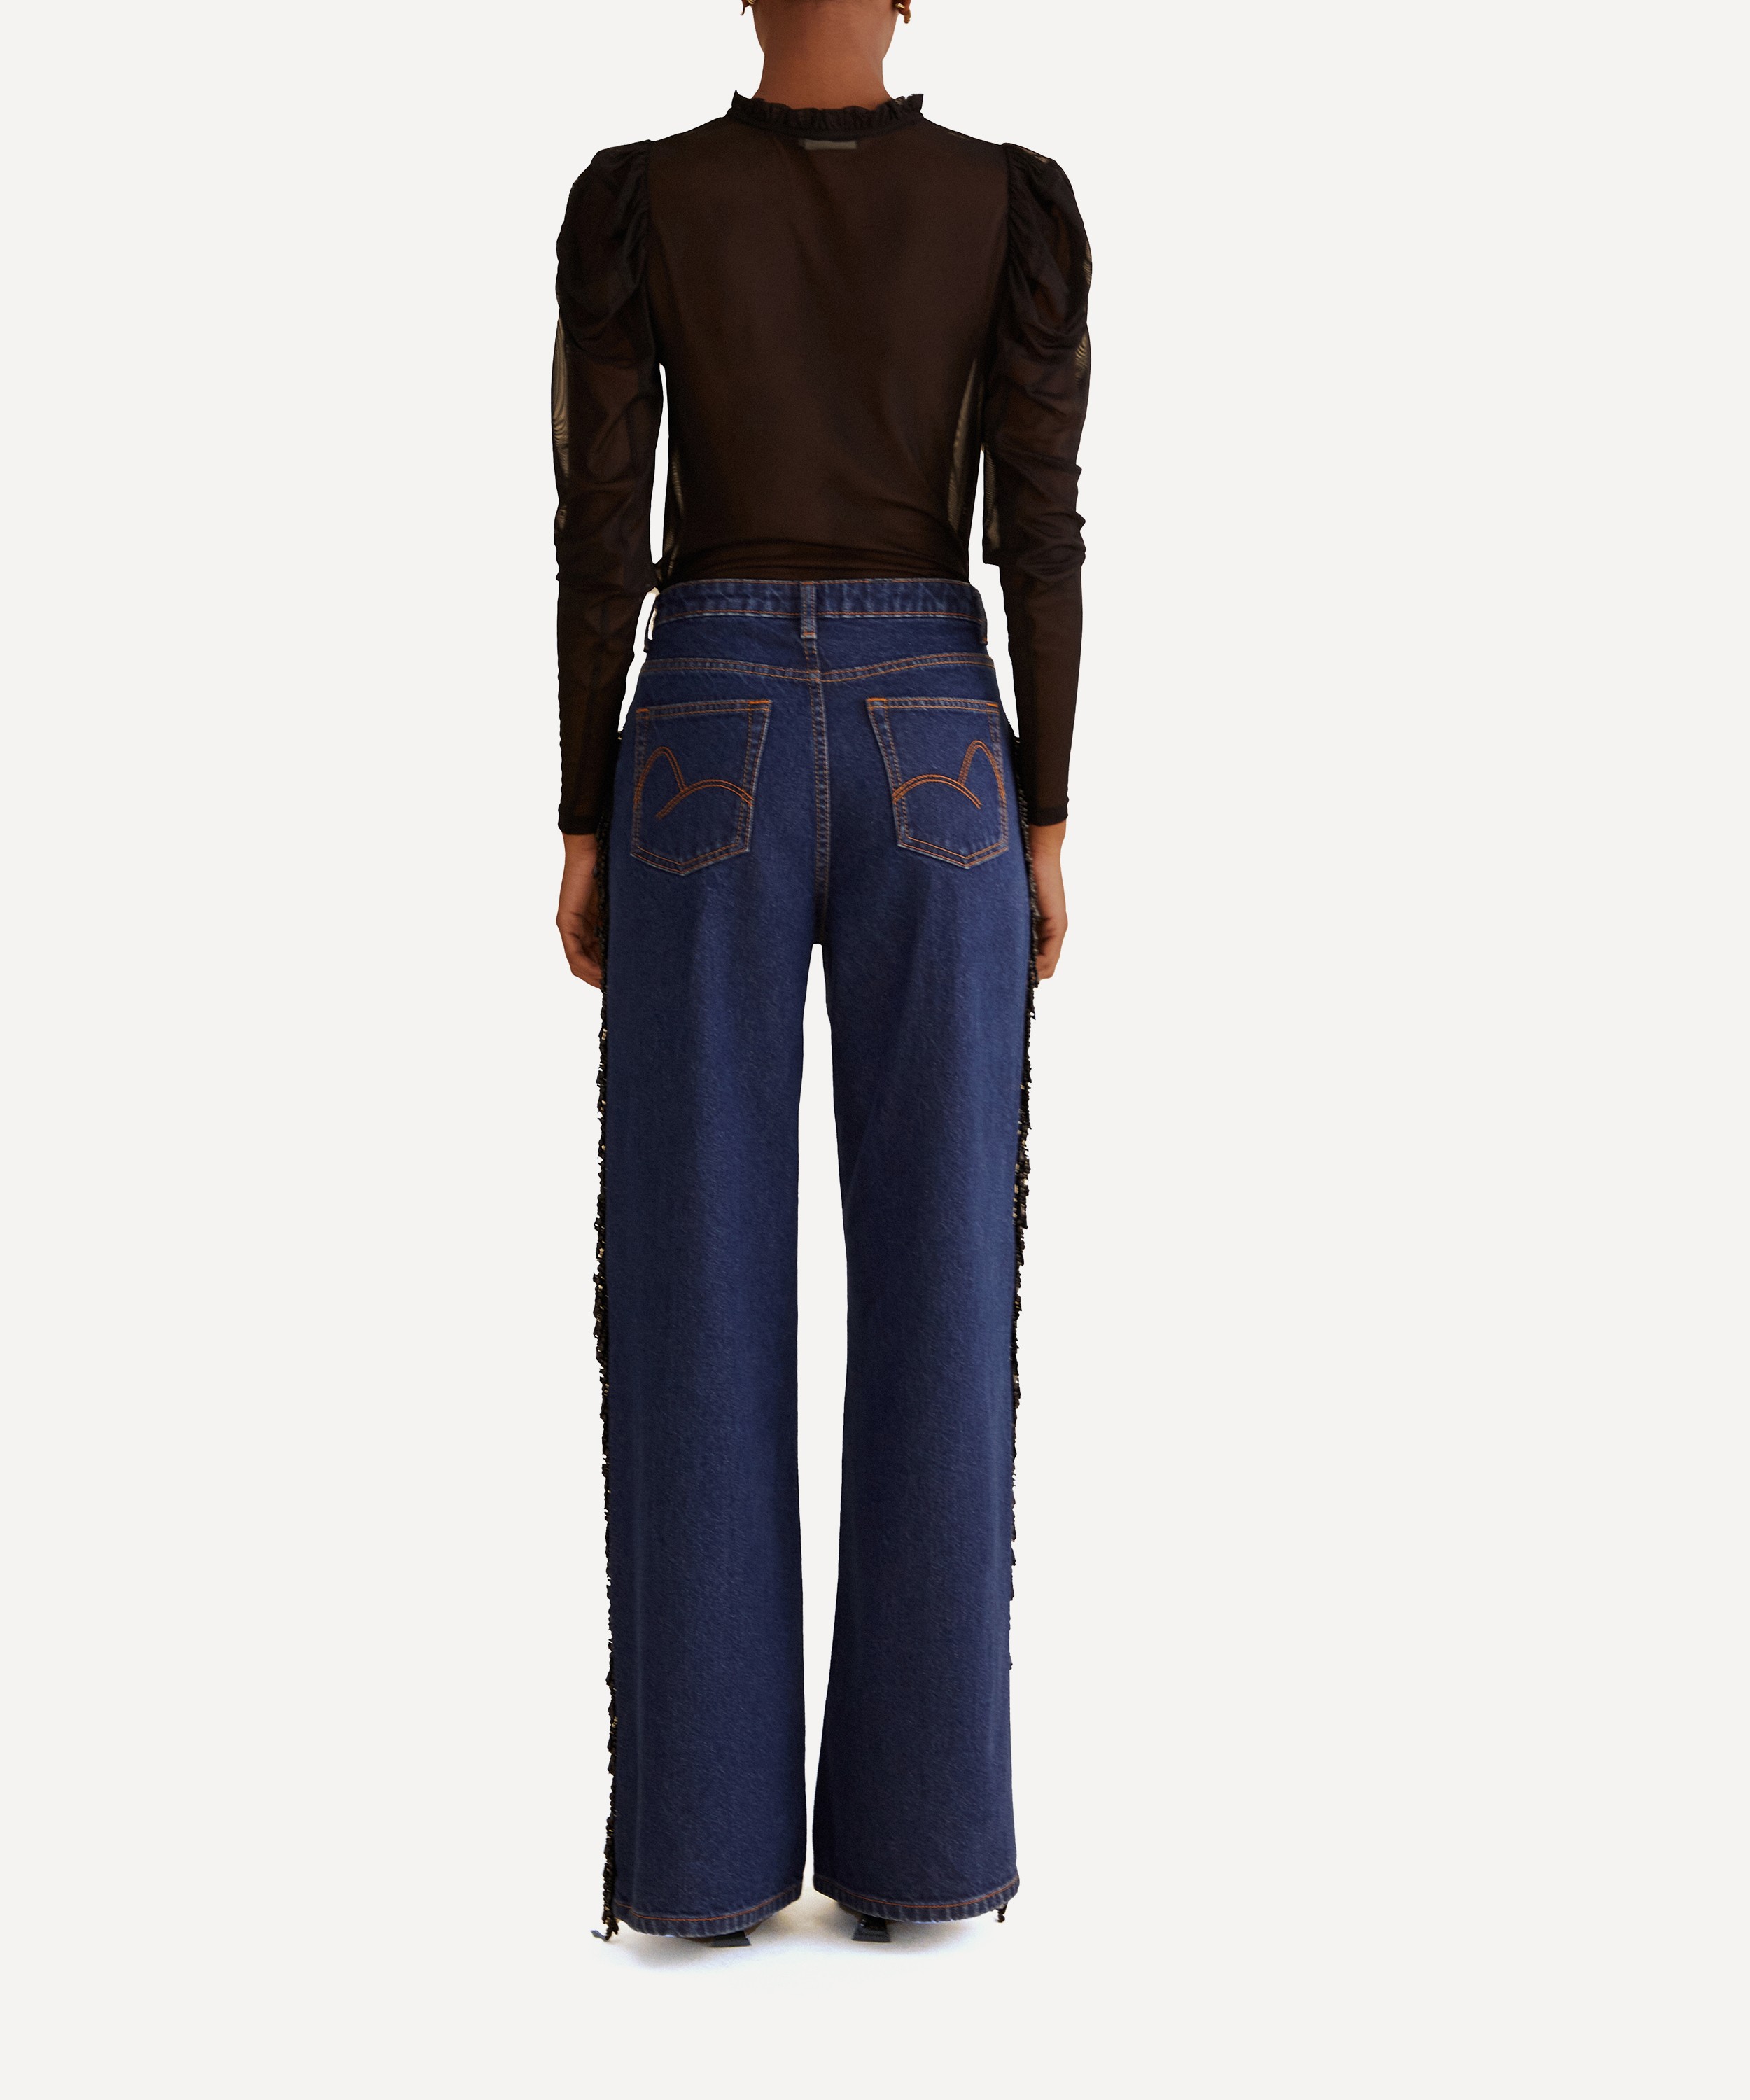 FARM Rio - Fringe Beaded Wide Jeans image number 2